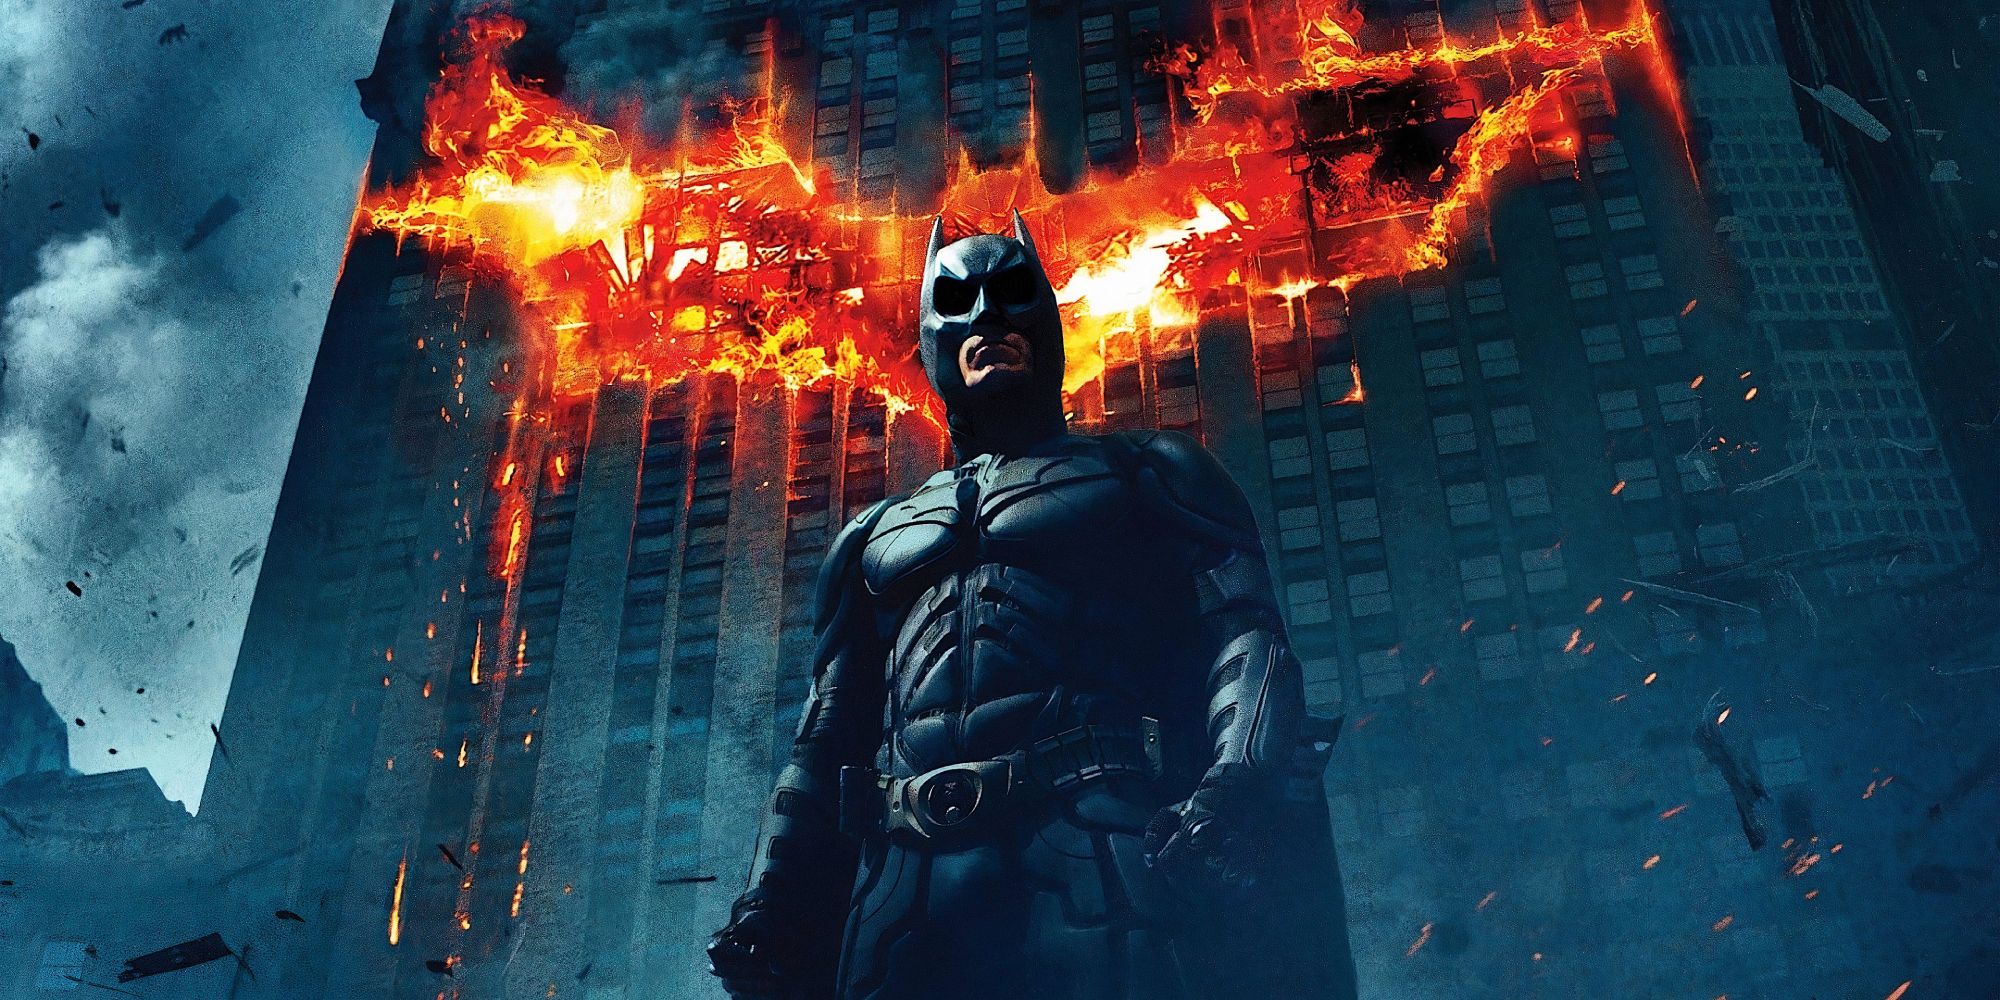 Batman standing in front of a flaming building in The Dark Knight